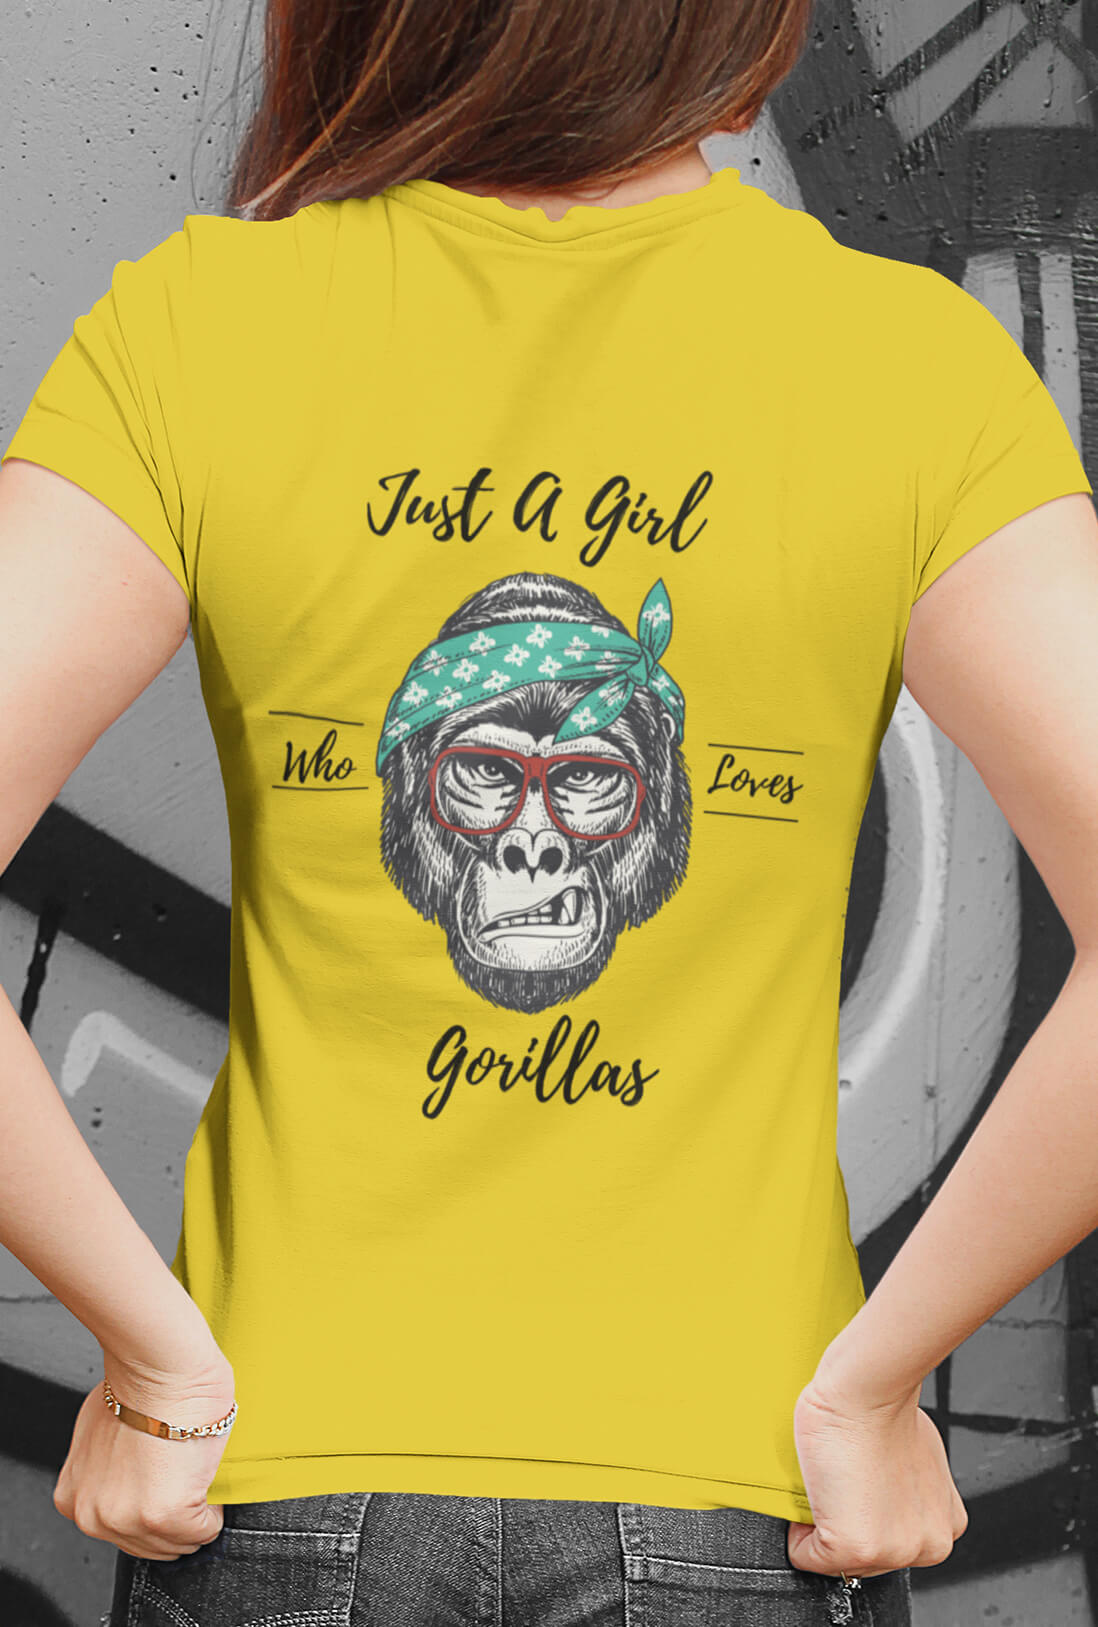 Just a Girl Women's Back Printed T-Shirt